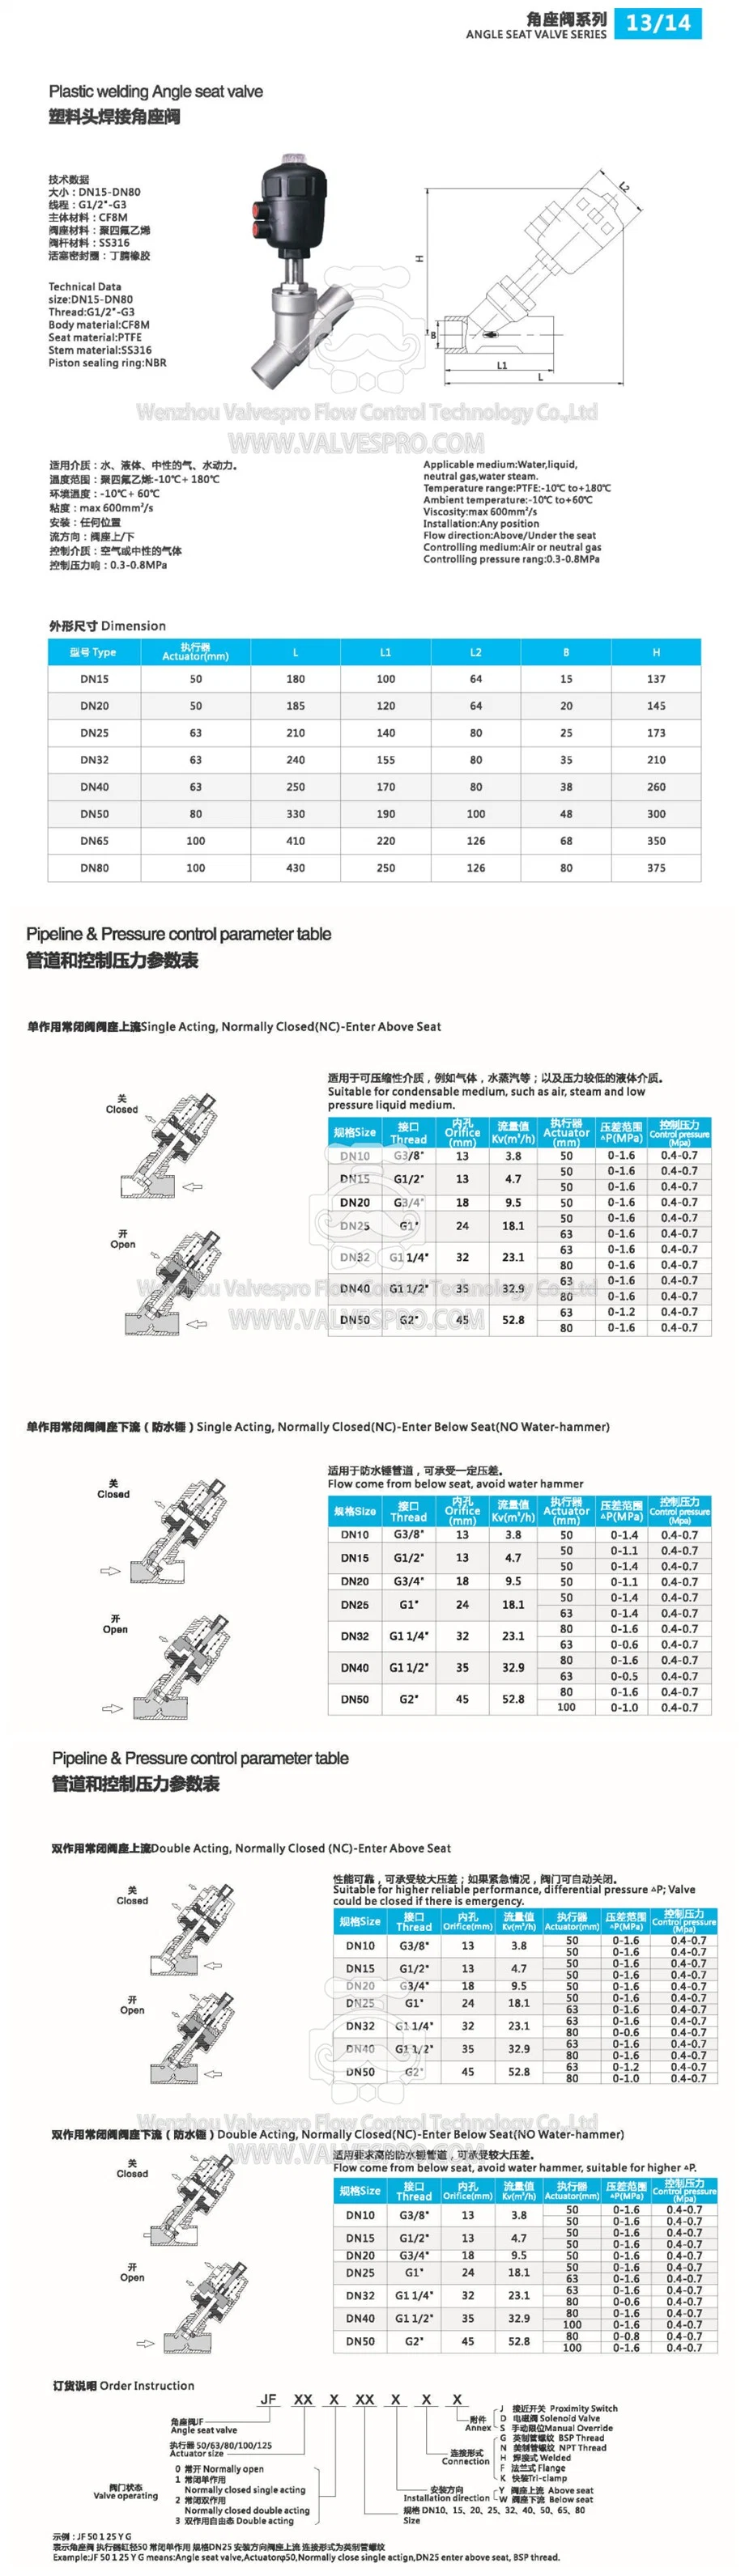 Manual Override for Stroke Actuator Y Type Manual Angle Seat Valve